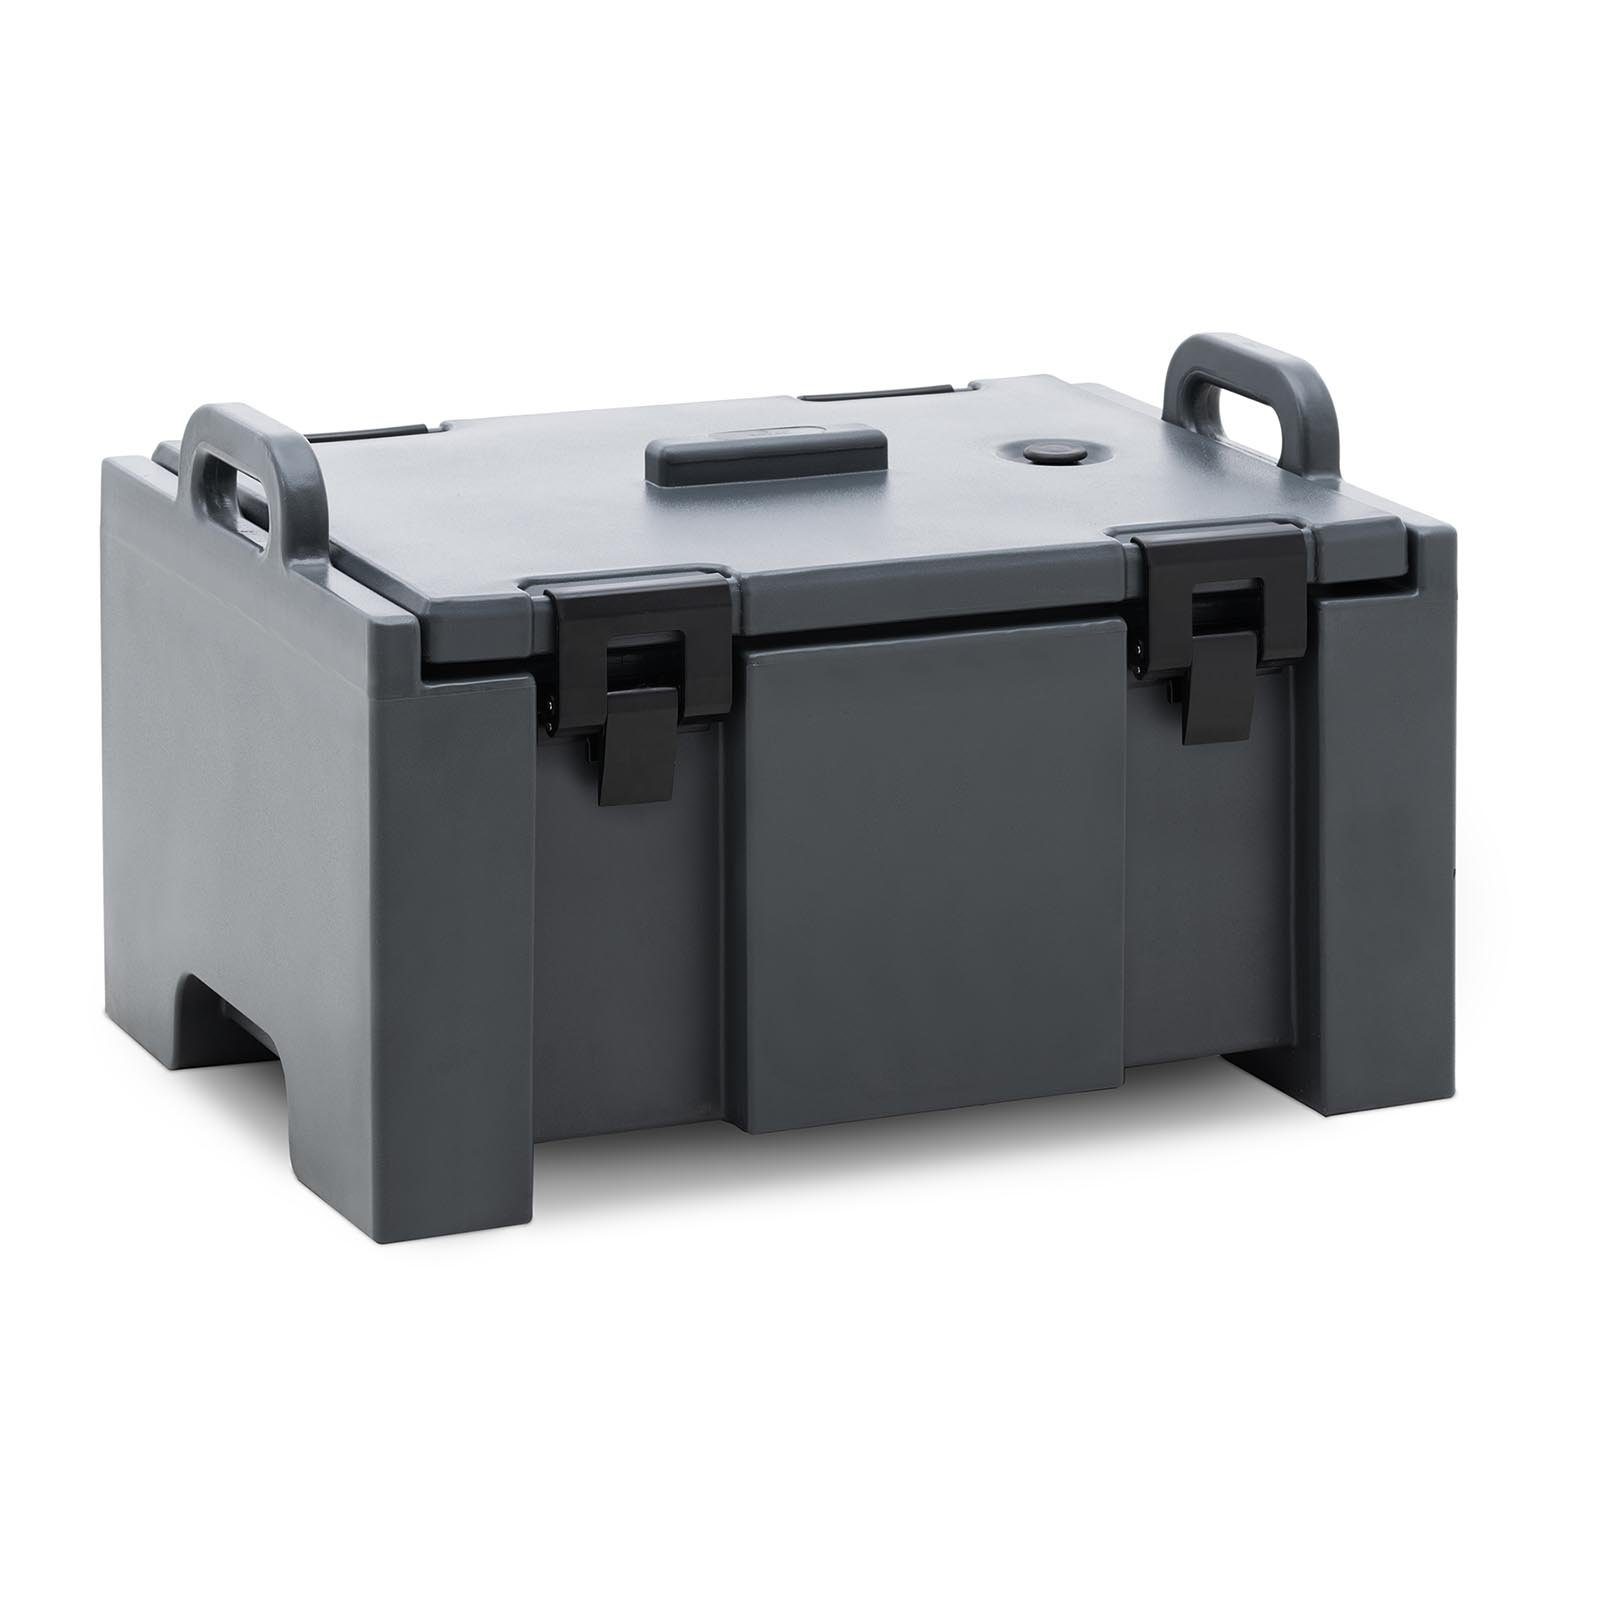 Toplader Thermobehälter (Polyethylen), GN Schaumstoff (15 Thermobehälter Warmhaltebox - 1/1 Thermobox für Royal 20 Kunststoff Catering cm,